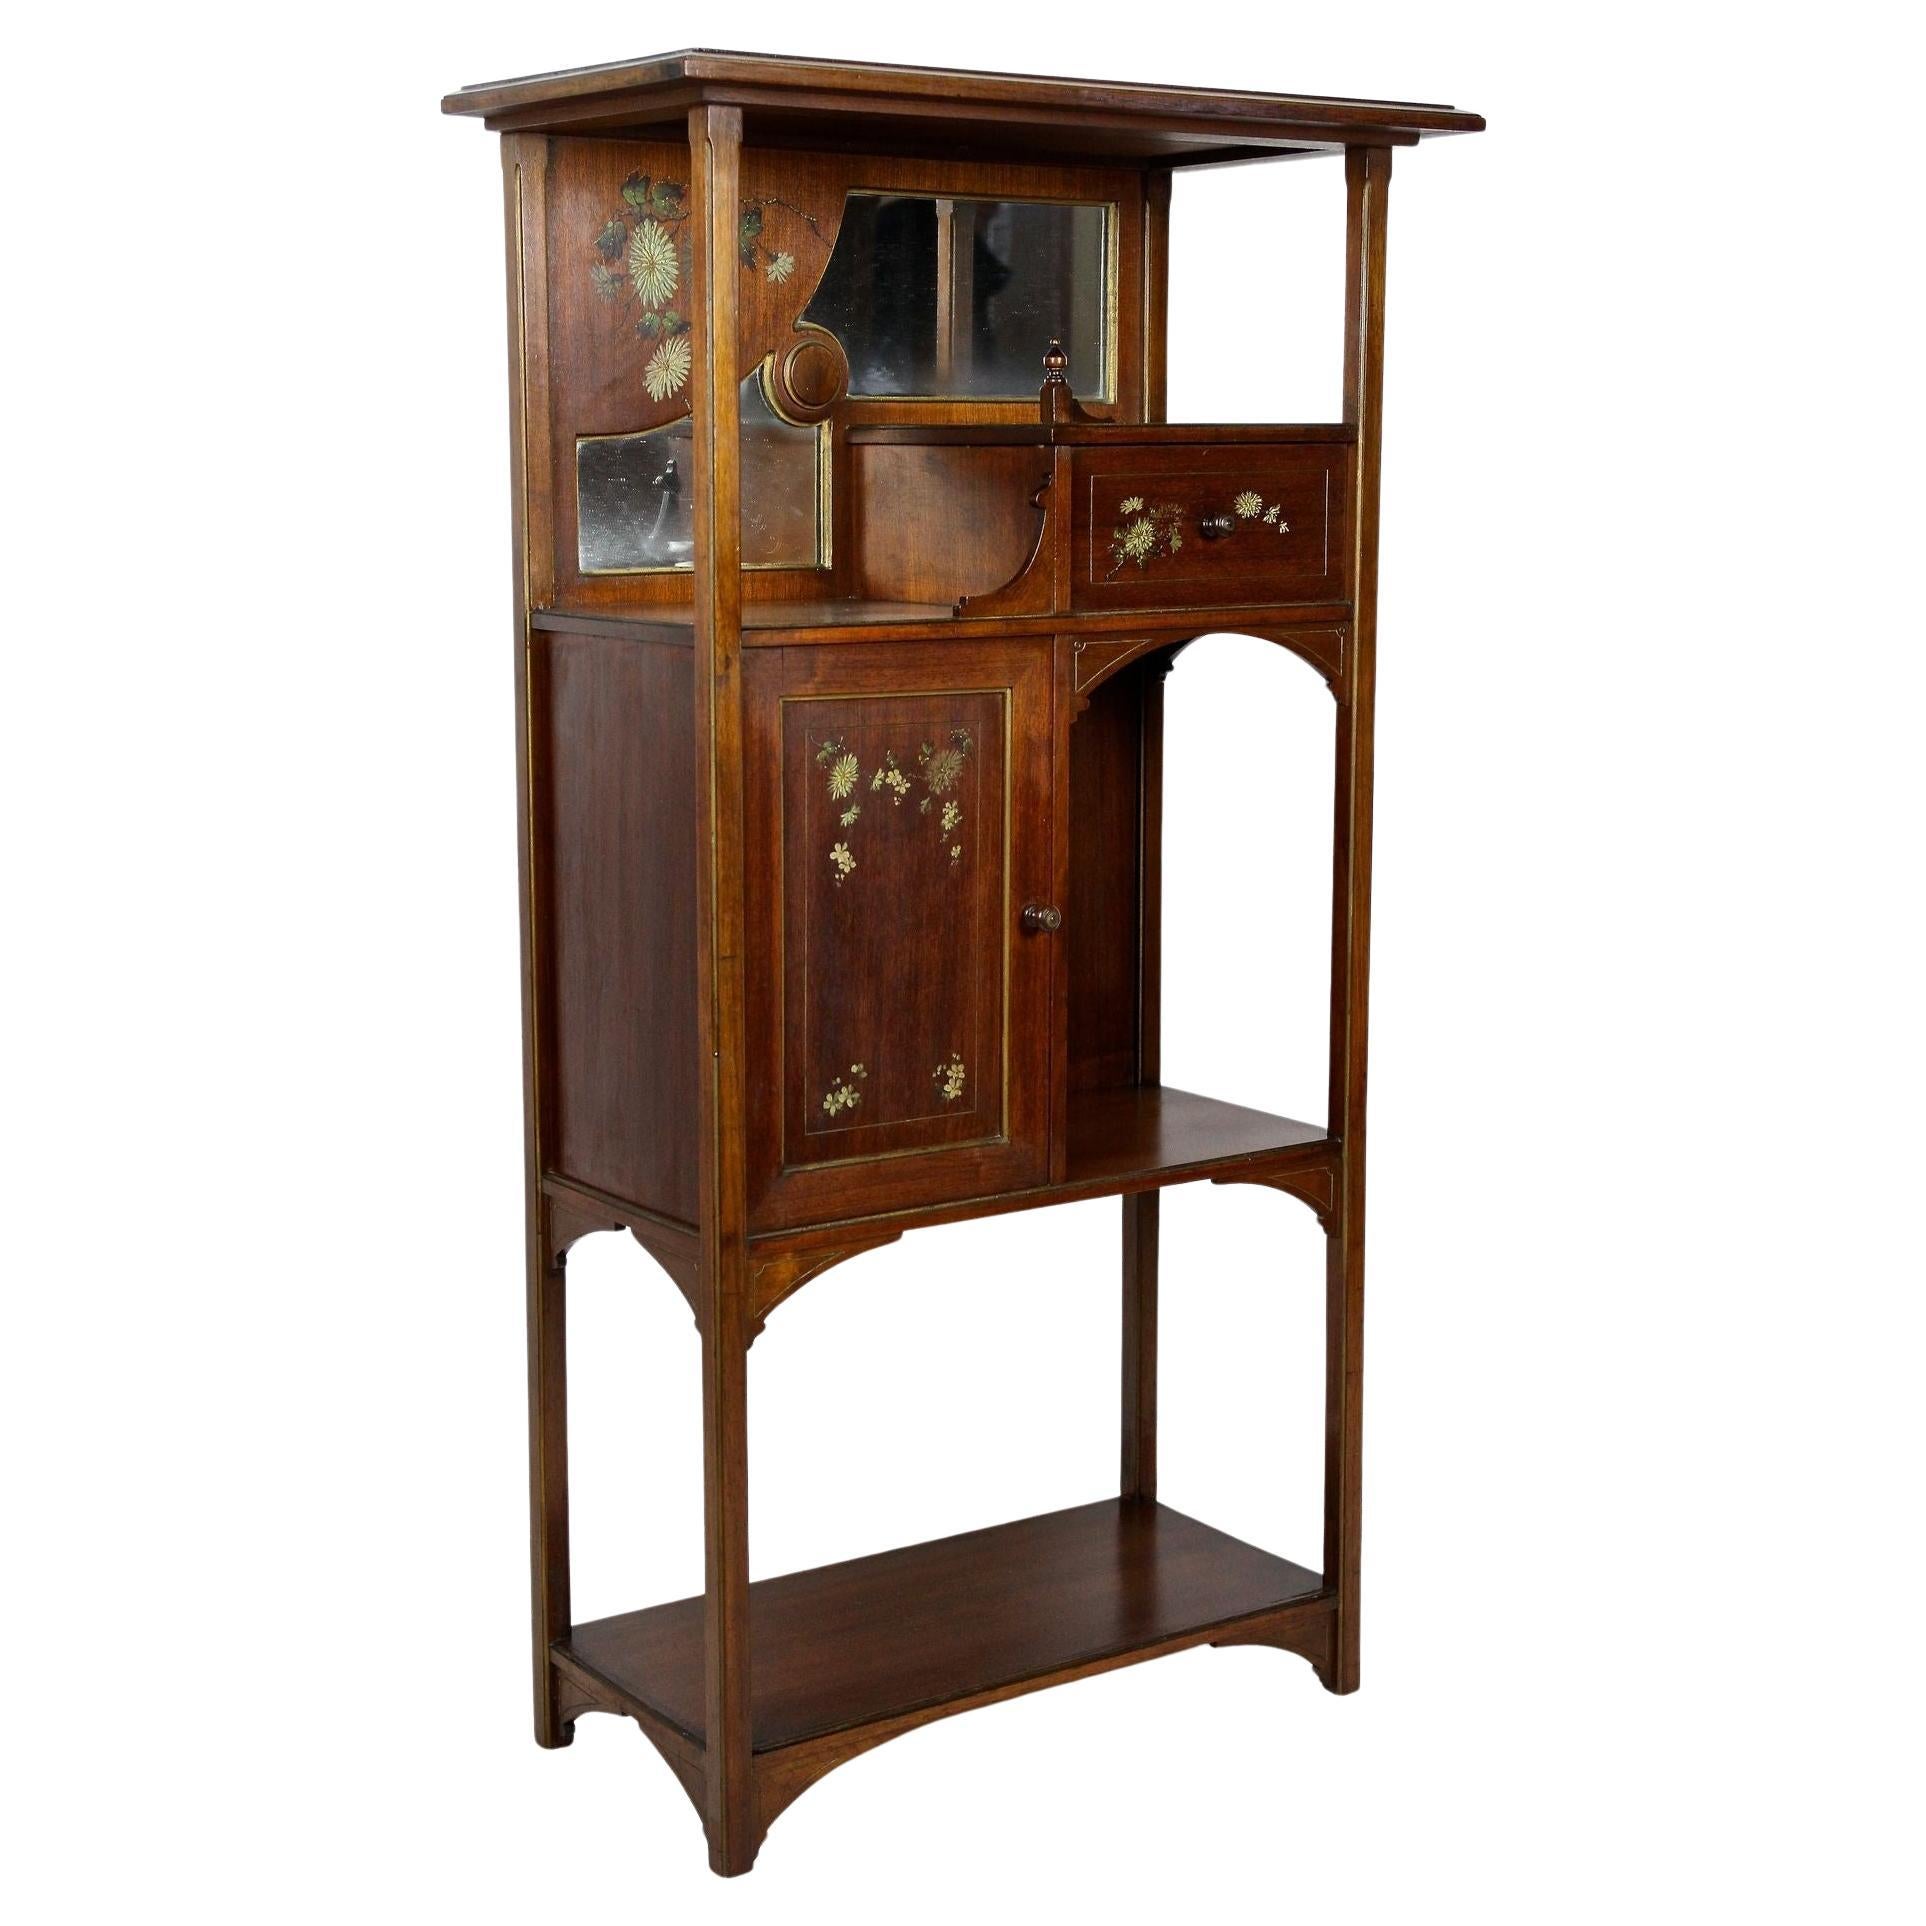 Art Nouveau Mahogany Display Cabinet/ Etagere With Painted Flowers, FR ca. 1900